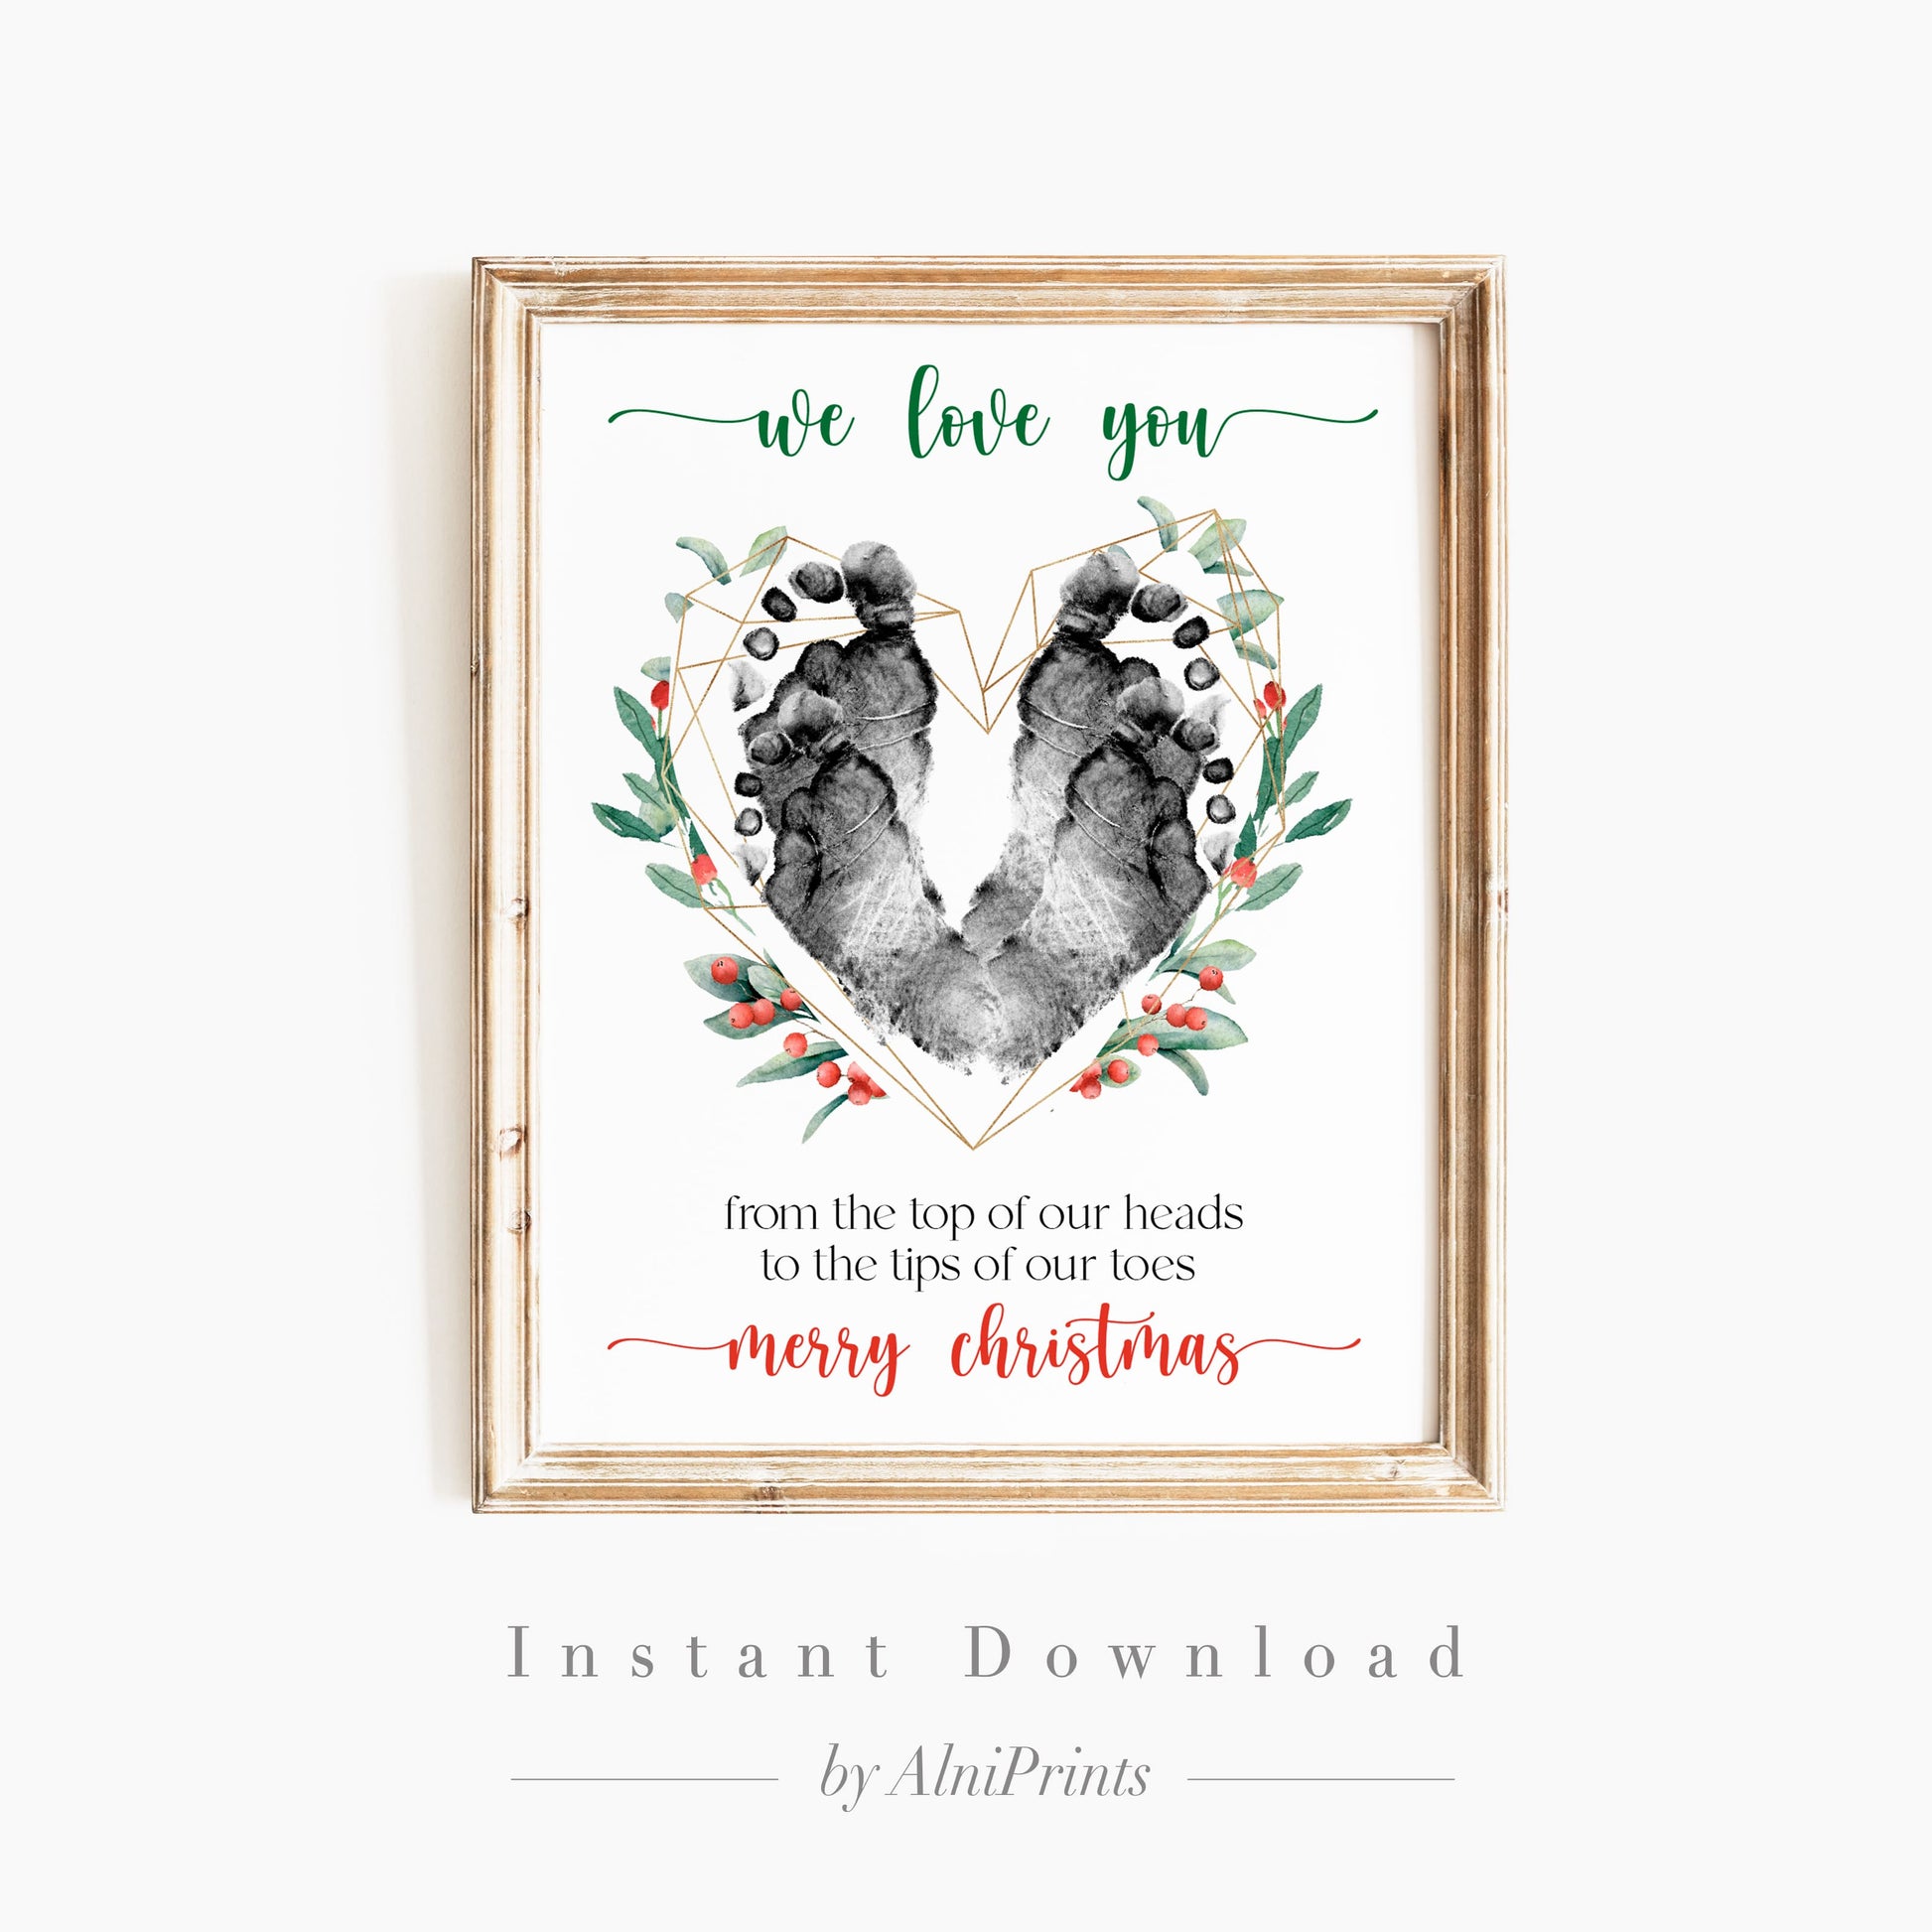 'We Love You' Christmas Card with Footprint